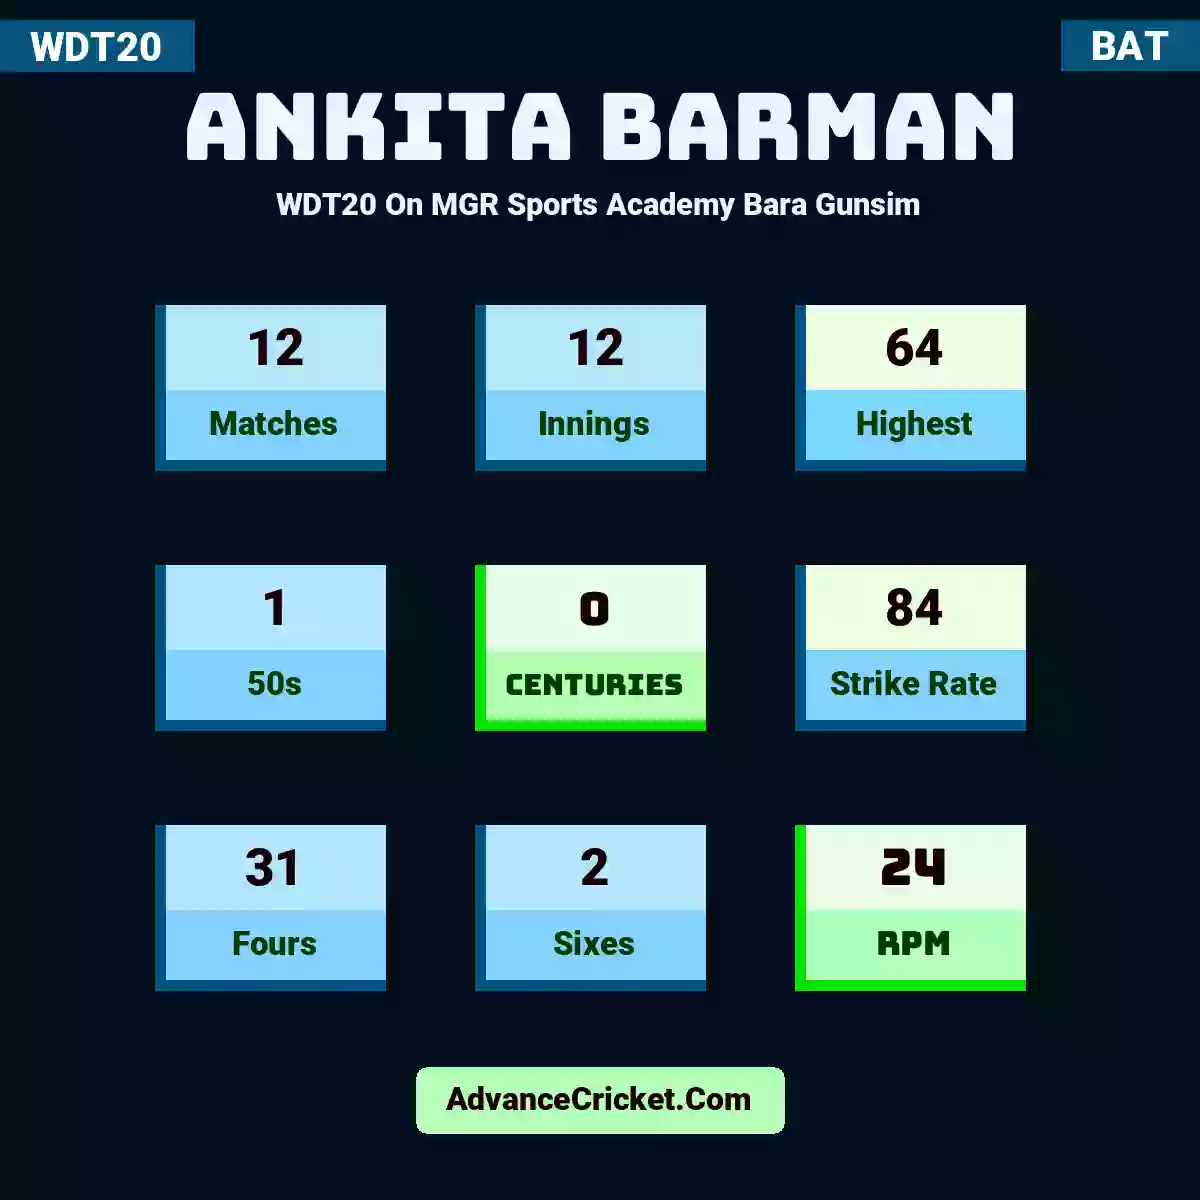 Ankita Barman WDT20  On MGR Sports Academy Bara Gunsim, Ankita Barman played 12 matches, scored 64 runs as highest, 1 half-centuries, and 0 centuries, with a strike rate of 84. A.Barman hit 31 fours and 2 sixes, with an RPM of 24.